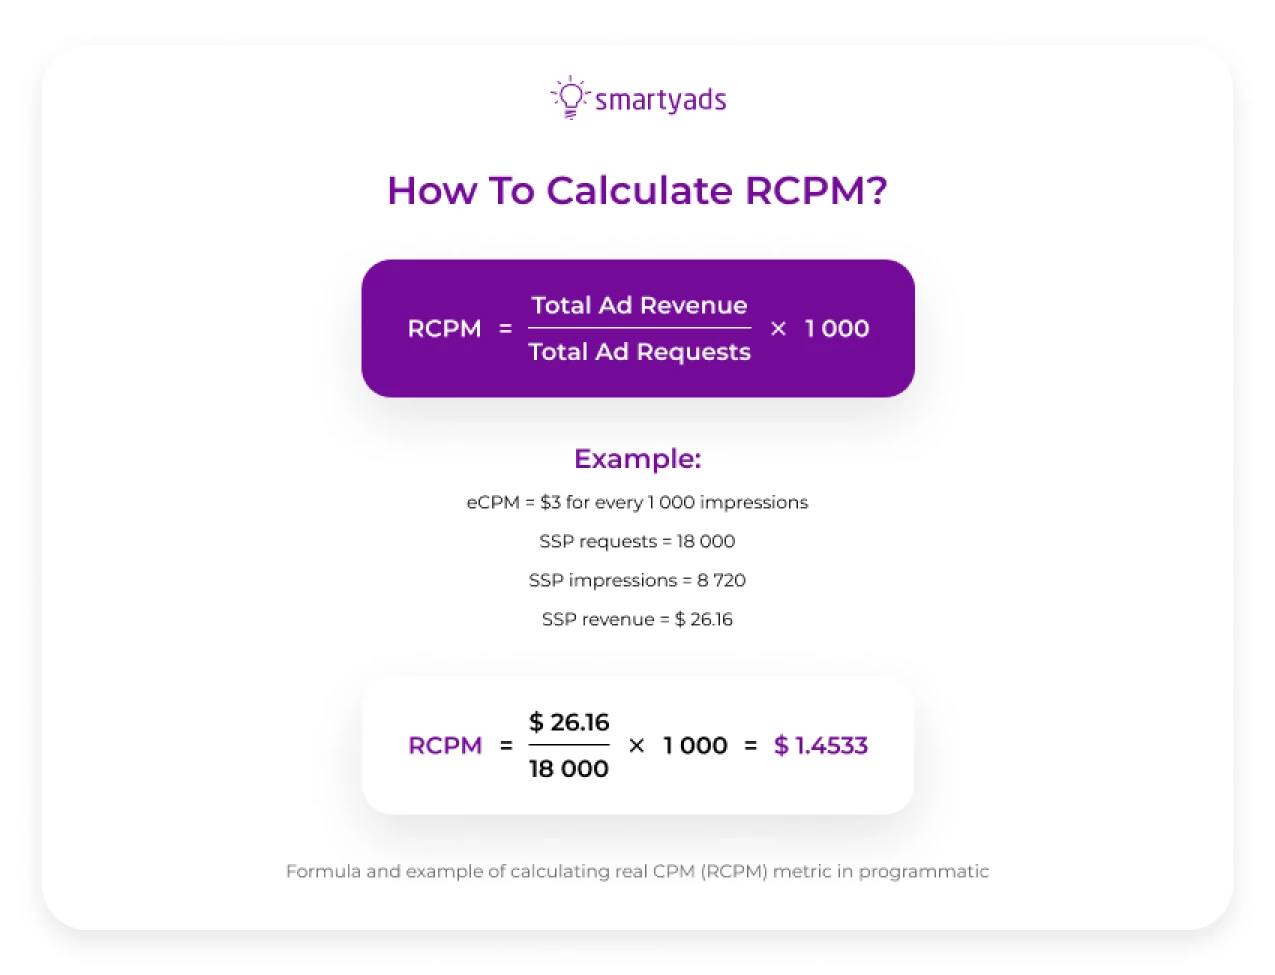 Formula and example of calculating real CPM (RCPM) metric in programmatic